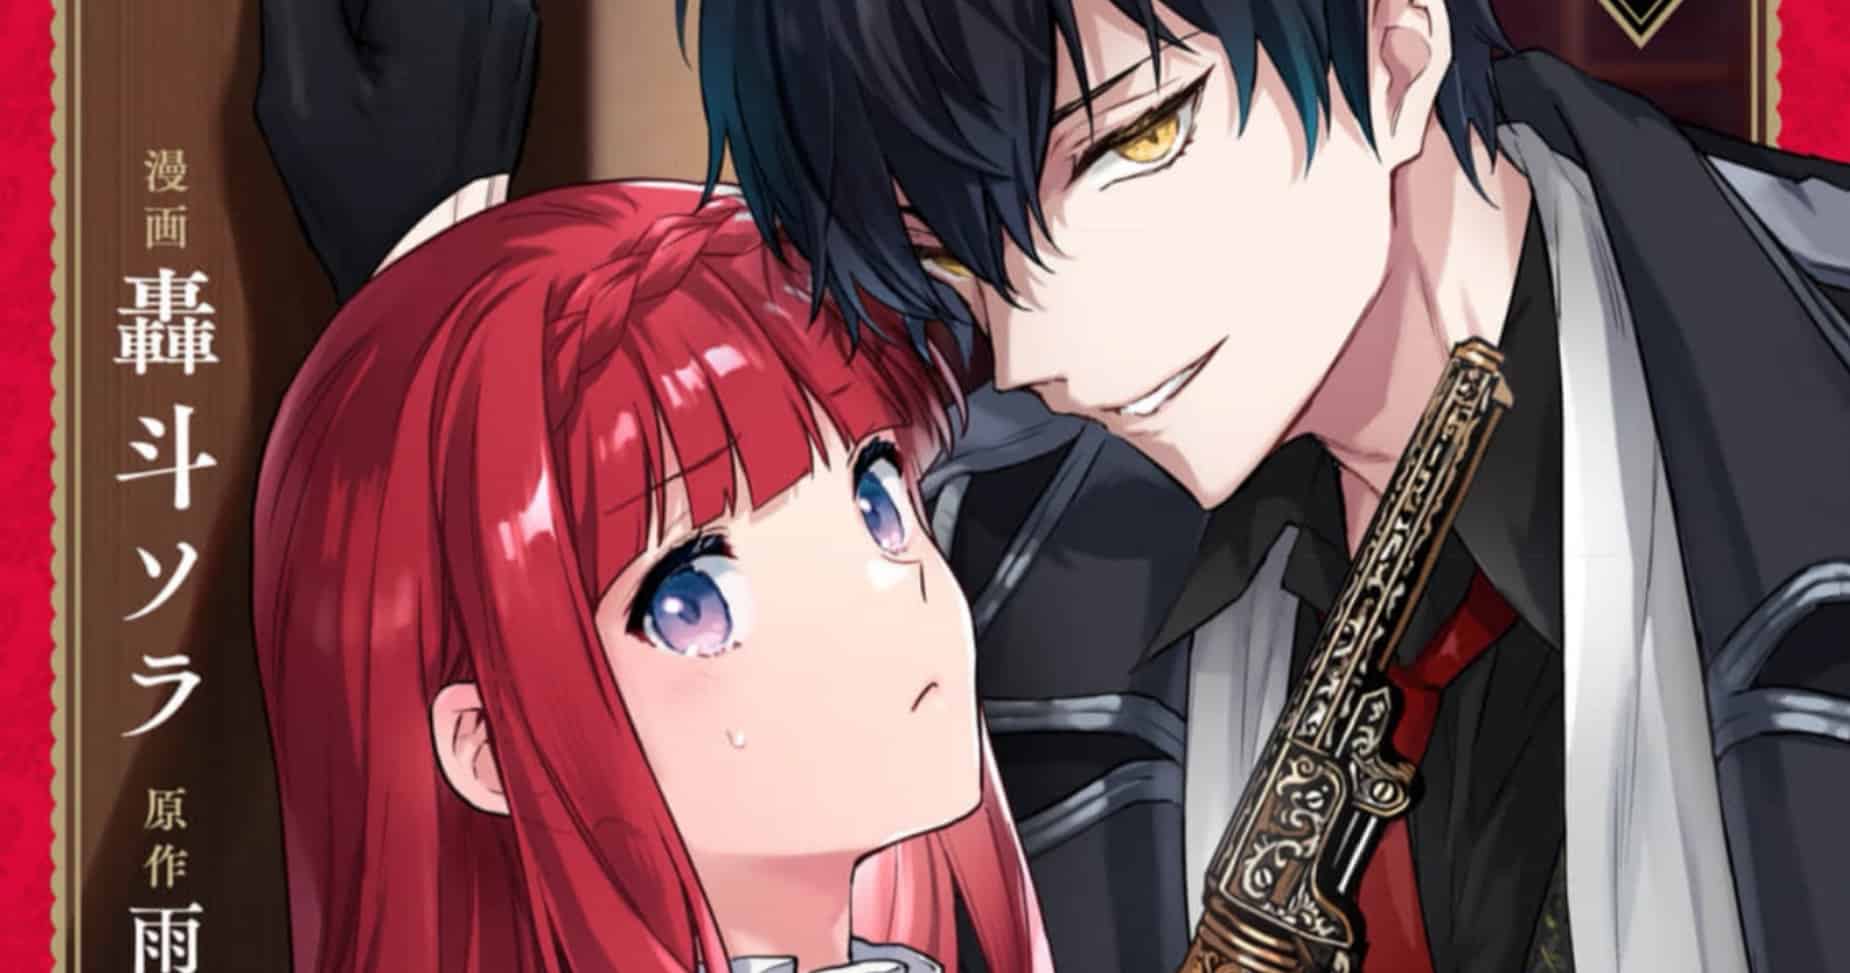 The Beloved Daughter of a Mafia Family Was Reincarnated as a Mafia Daughter in an Otome Game